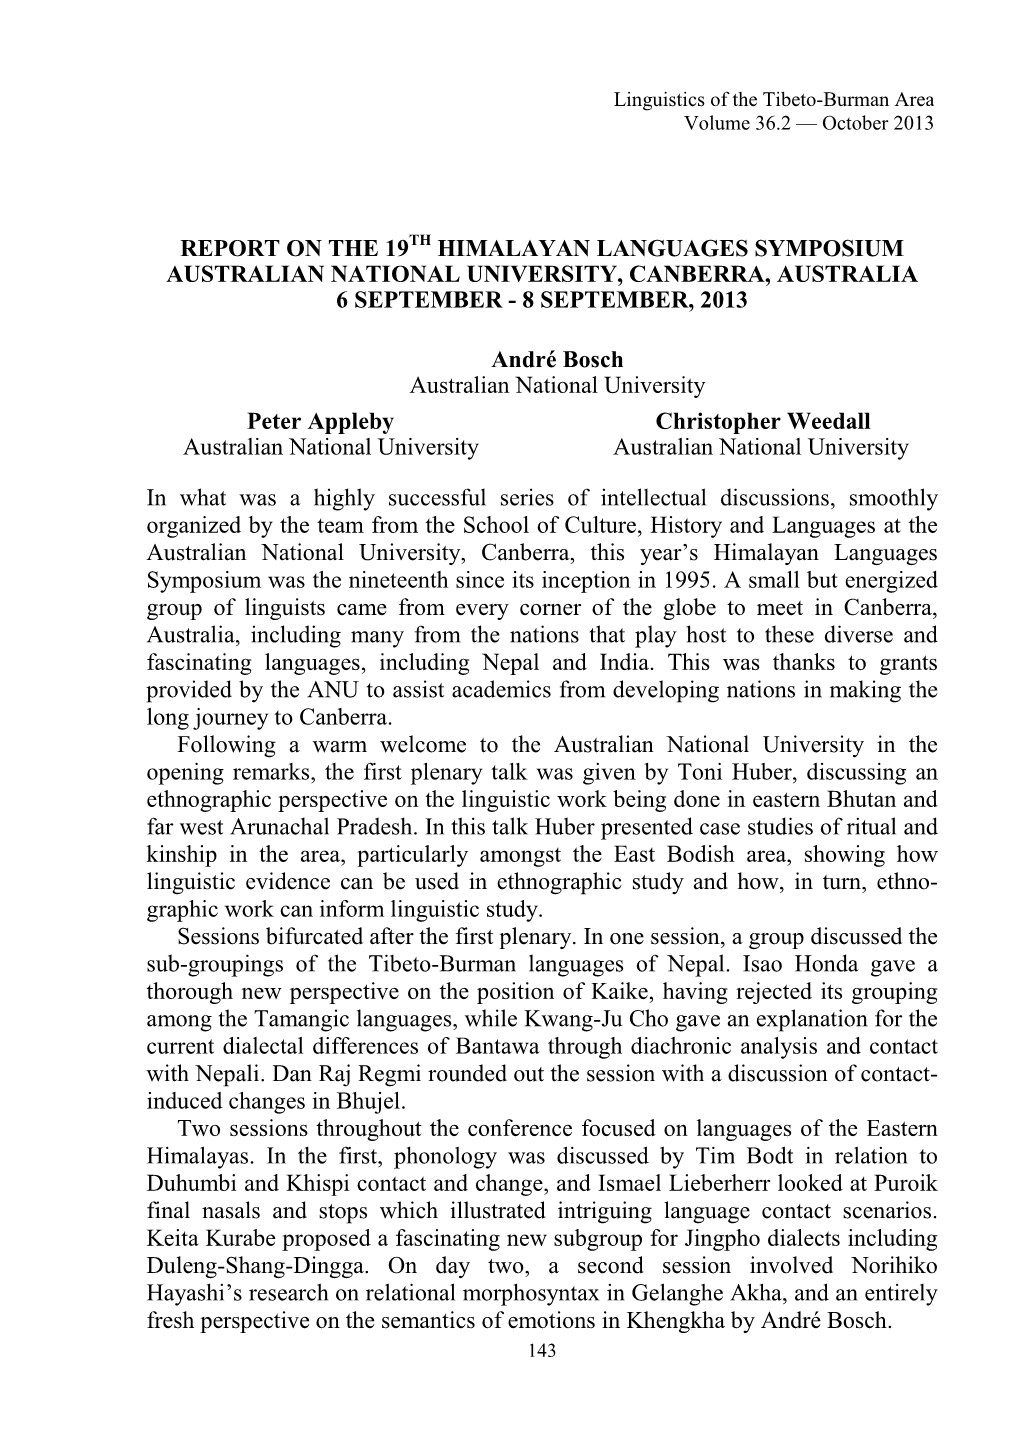 Report on the 19 Himalayan Languages Symposium